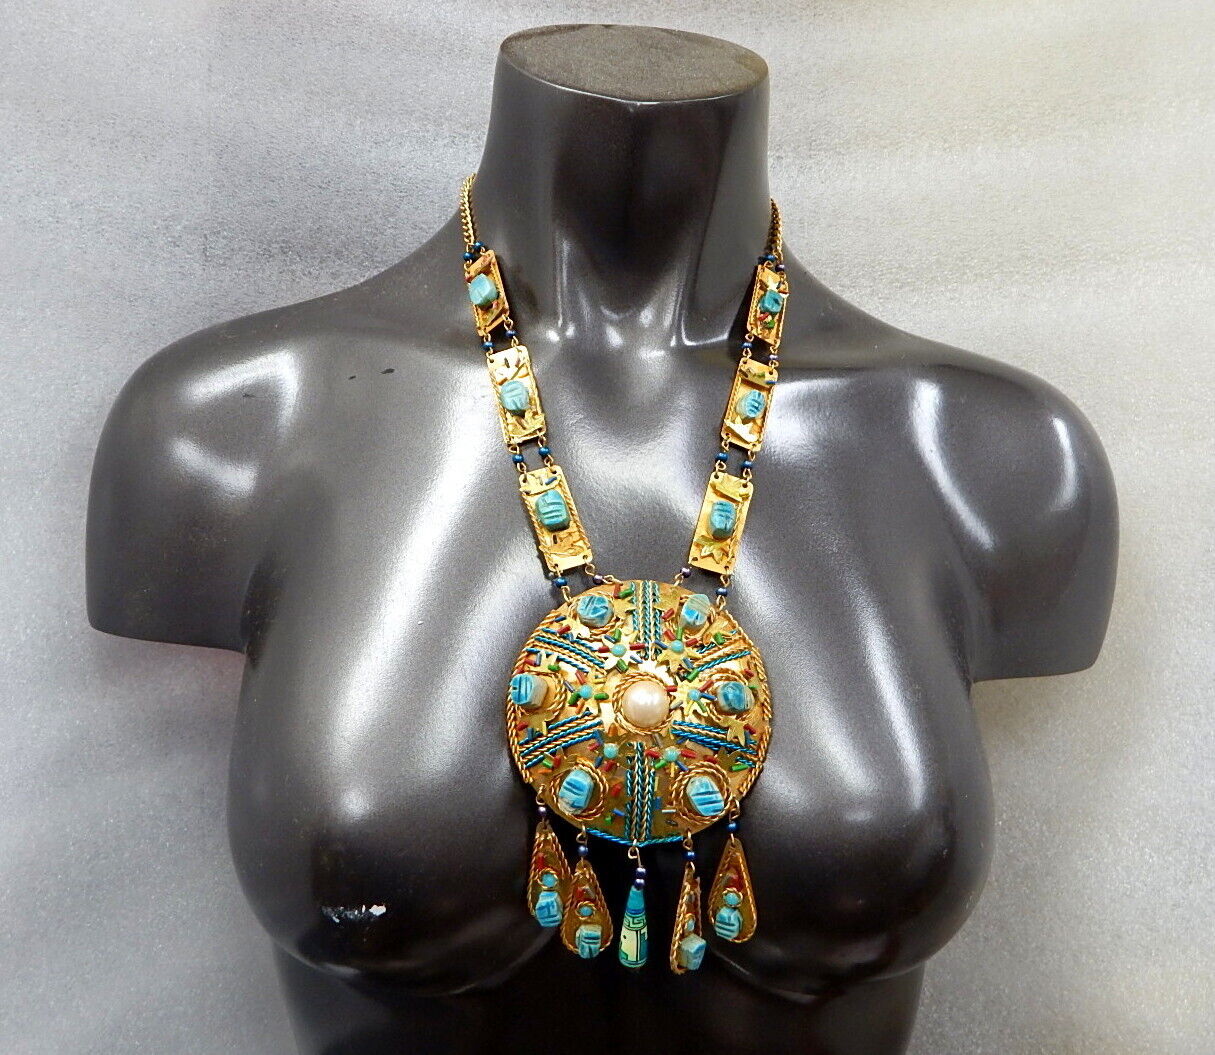 Ancient Cleopatra Egyptian Revival Tomb Necklace Museum Reproduction Replica